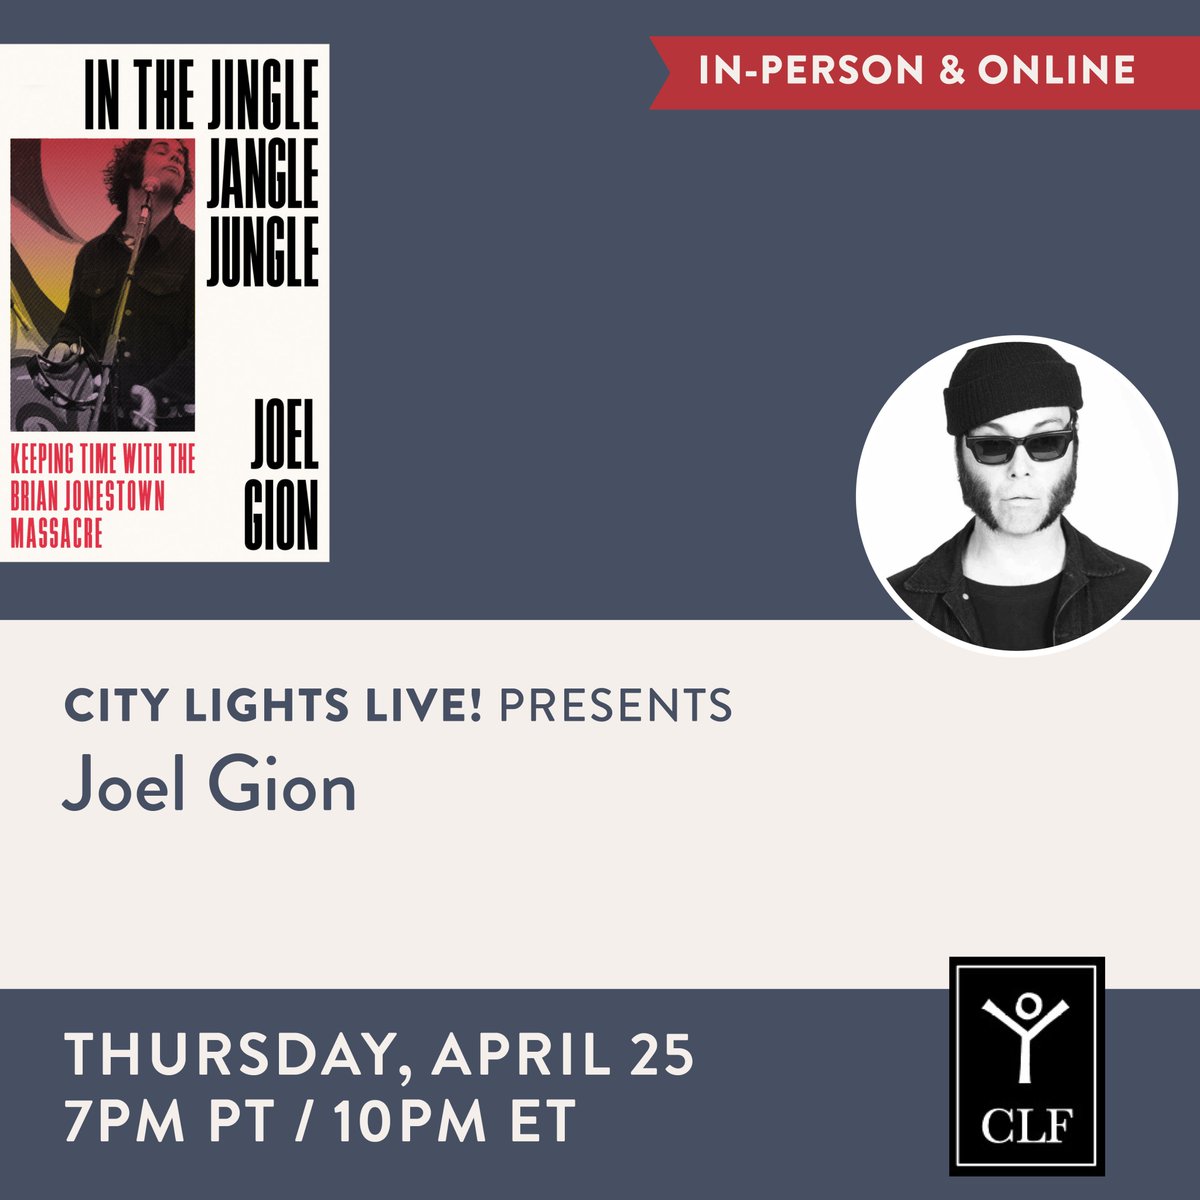 Join us this evening to celebrate @realjoelgion’s book IN THE JINGLE JANGLE JUNGLE: Keeping Time with the Brian Jonestown Massacre, published by @rarebirdlit. Sign up here for the livestream: citylights.com/events/joel-gi…